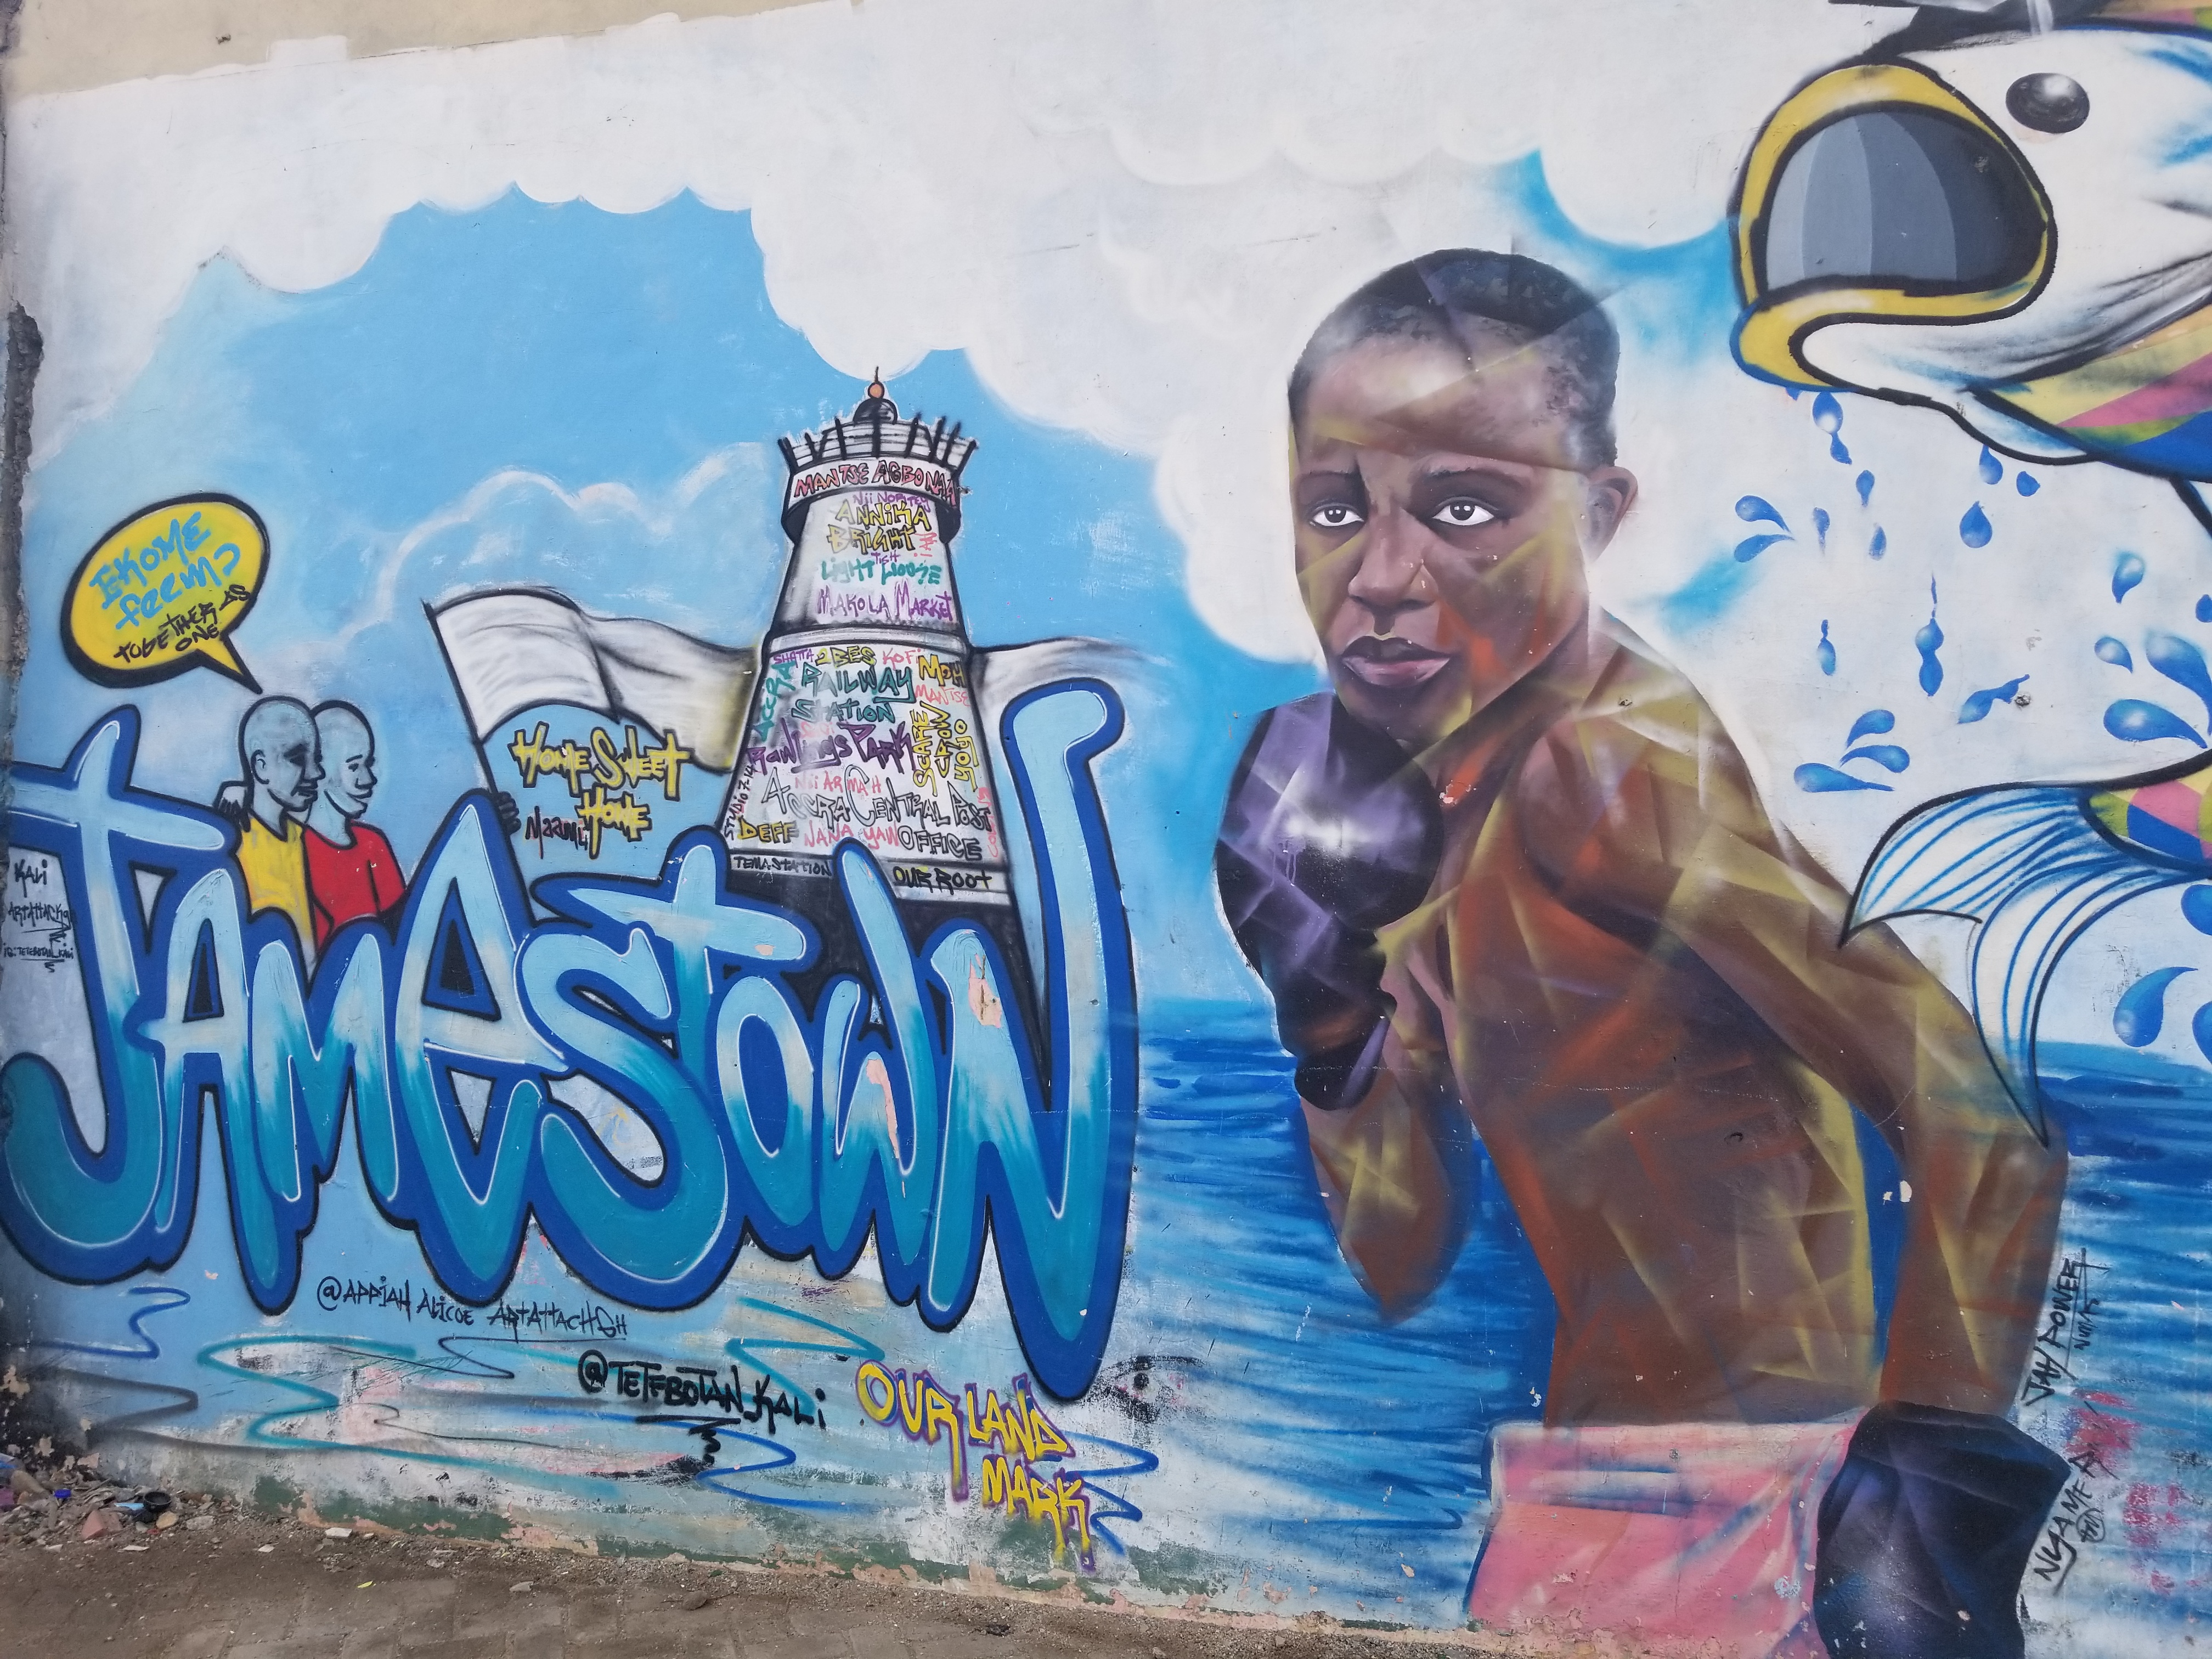 Graffiti in Jamestown in Accra, Ghana. Famous Boxer. CC: Jasmine Nears-Biesinger This work by Jasmine Nears is licensed under a Creative Commons Attribution-ShareAlike 4.0 International License